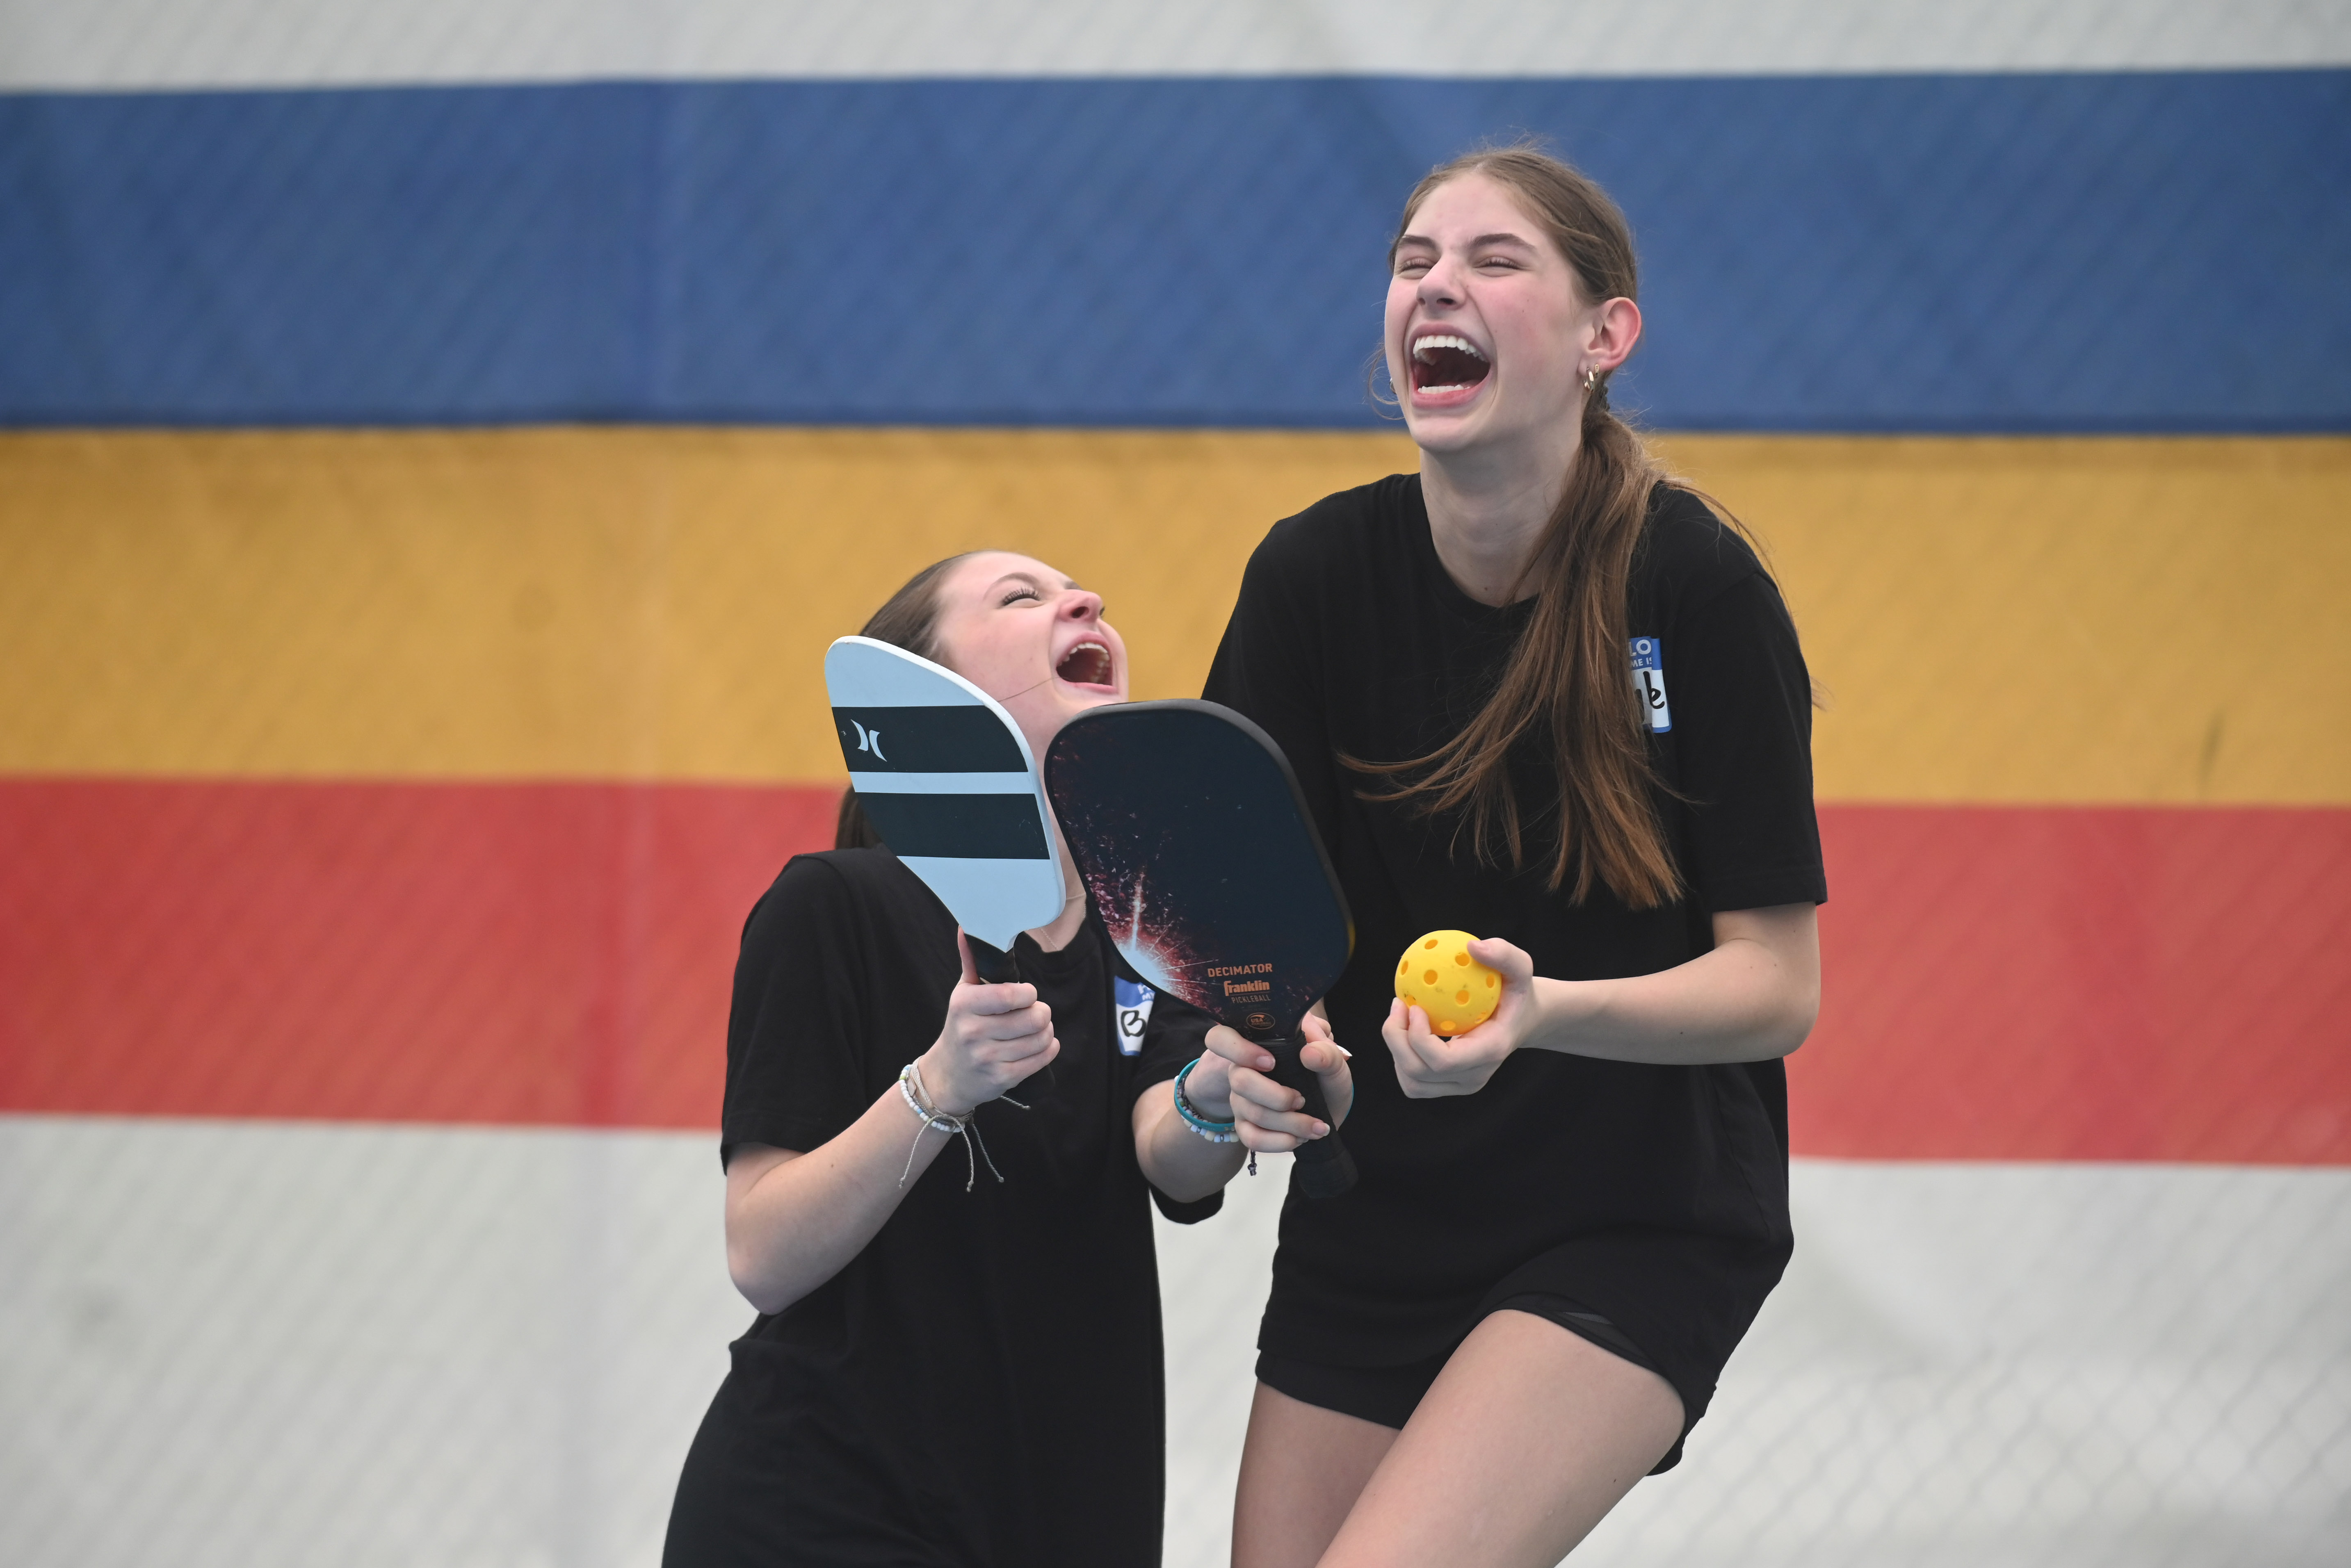 Freshmen Ryann Hoke, left, and Brenna Maas laugh together after giving up a point to their opponents during a pickleball tournament at Coppermine 4 Seasons on Tuesday. The tournament was organized by Manchester Valley High School juniors Brady Bonney and Leigh Hoke to raise money and support for Morgan's Message, a nonprofit supporting student-athlete mental health initiatives. (Brian Krista/staff photo)